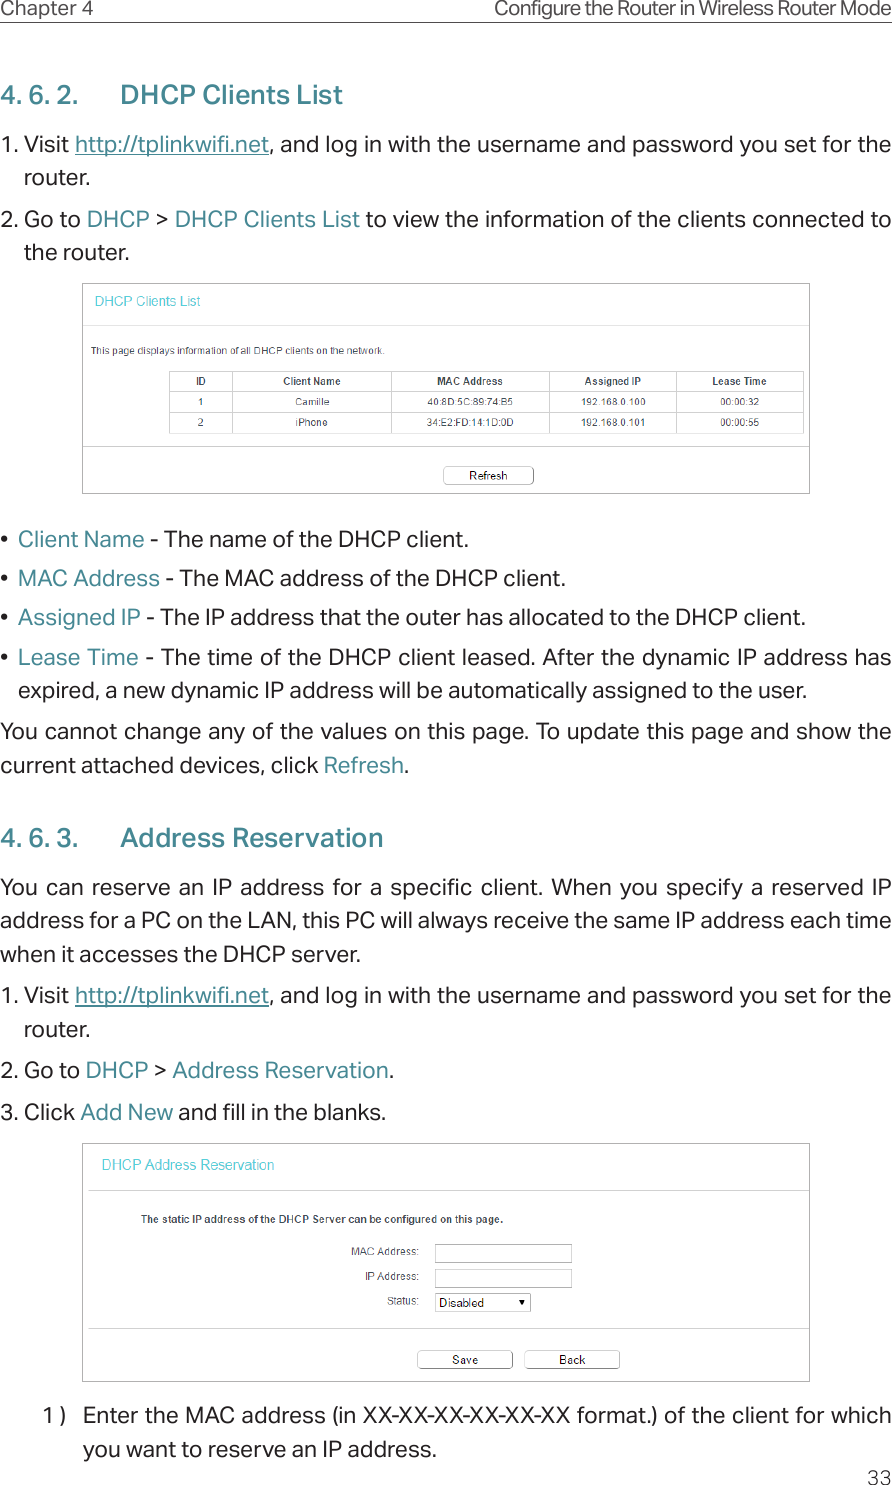 33Chapter 4 Configure the Router in Wireless Router Mode4. 6. 2.  DHCP Clients List1. Visit http://tplinkwifi.net, and log in with the username and password you set for the router.2. Go to DHCP &gt; DHCP Clients List to view the information of the clients connected to the router.•  Client Name - The name of the DHCP client.•  MAC Address - The MAC address of the DHCP client. •  Assigned IP - The IP address that the outer has allocated to the DHCP client.•  Lease Time - The time of the DHCP client leased. After the dynamic IP address has expired, a new dynamic IP address will be automatically assigned to the user.  You cannot change any of the values on this page. To update this page and show the current attached devices, click Refresh.4. 6. 3.  Address ReservationYou can reserve an IP address for a specific client. When you specify a reserved IP address for a PC on the LAN, this PC will always receive the same IP address each time when it accesses the DHCP server.1. Visit http://tplinkwifi.net, and log in with the username and password you set for the router.2. Go to DHCP &gt; Address Reservation.3. Click Add New and fill in the blanks.1 )  Enter the MAC address (in XX-XX-XX-XX-XX-XX format.) of the client for which you want to reserve an IP address.